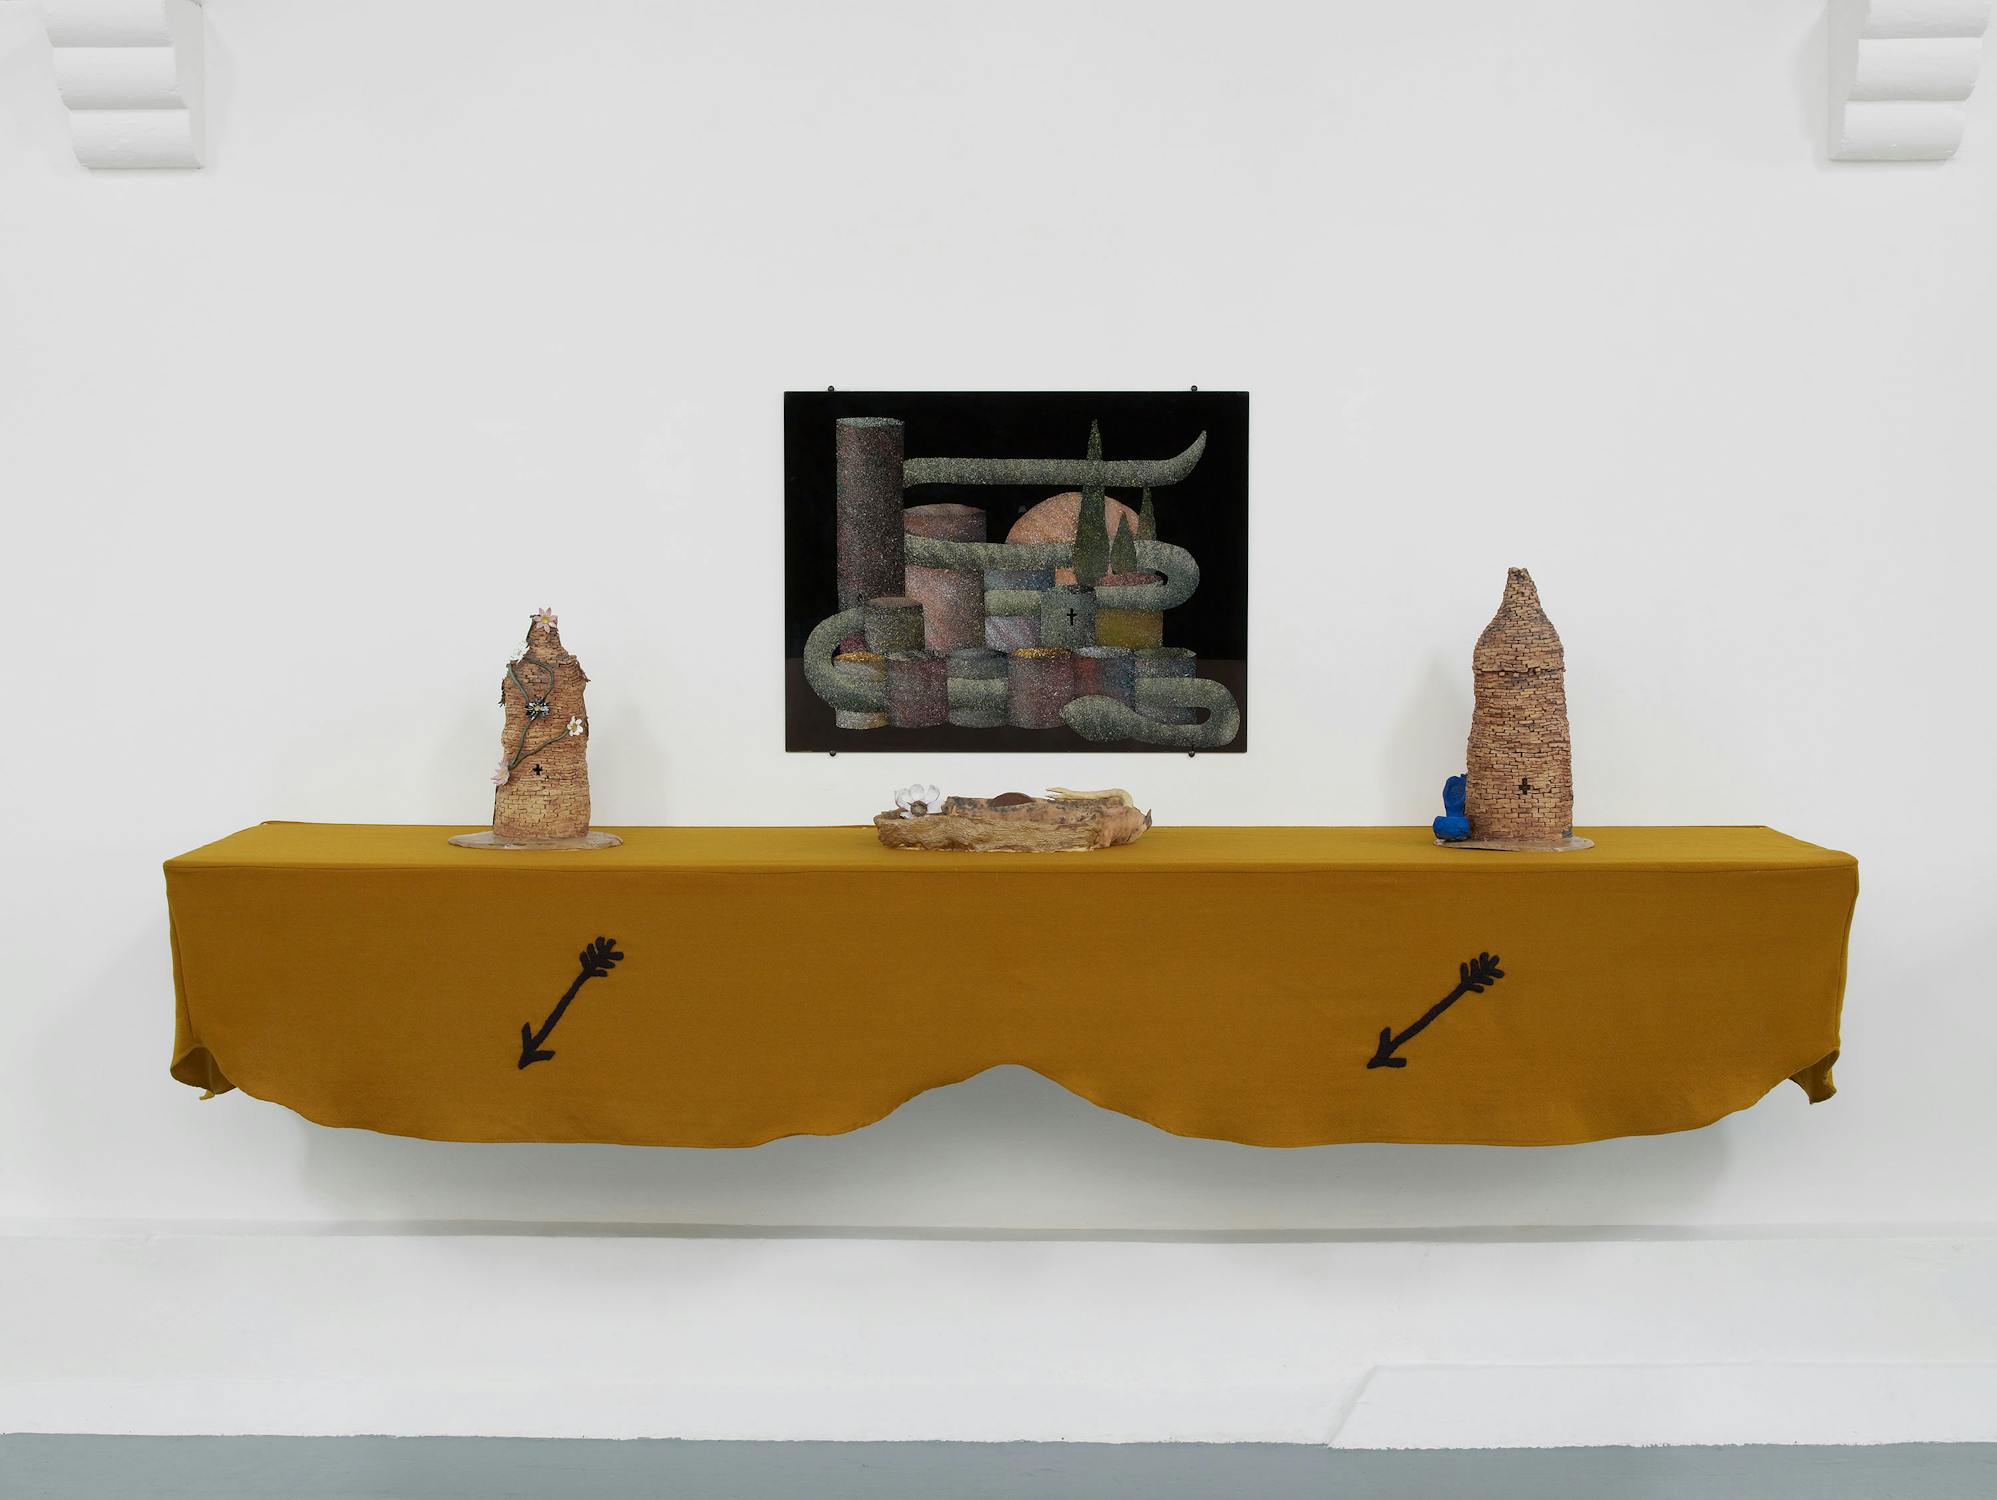 A view of an artwork installation comprising a wall-mounted shelf draped with mustard-coloured fabric. The display comprises three ceramic vessels. A wall-mounted artwork is displayed the shelf.